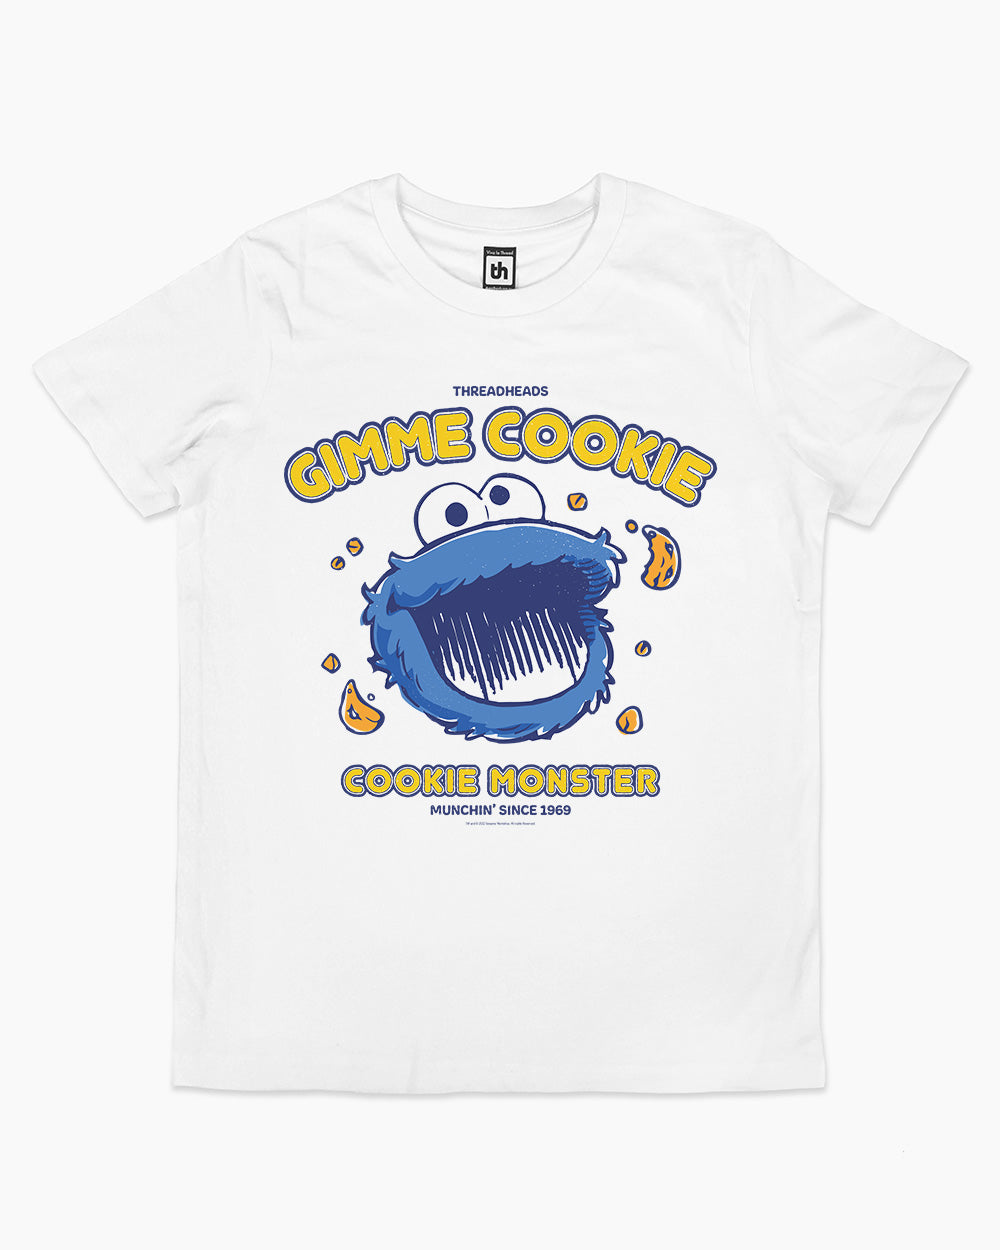  Sesame Street Cookie Monster Face Blue Tee T-Shirt : Clothing,  Shoes & Jewelry